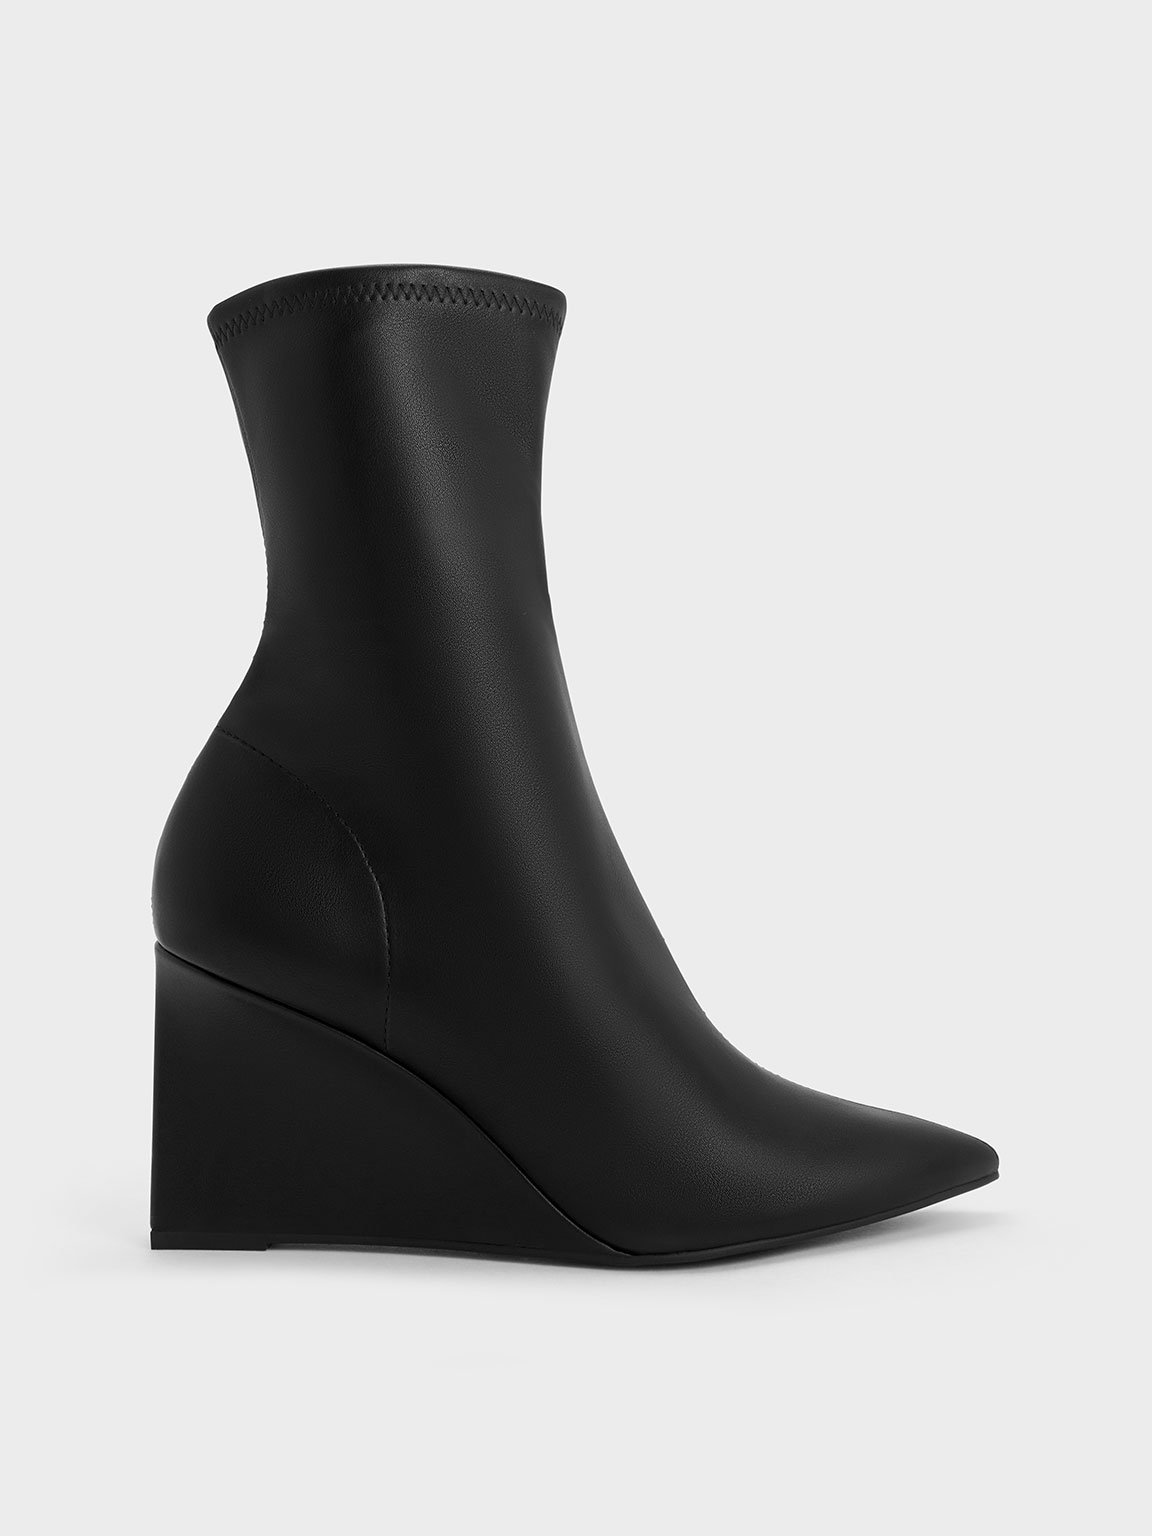 Black Pointed-Toe Wedge Ankle Boots | CHARLES & KEITH